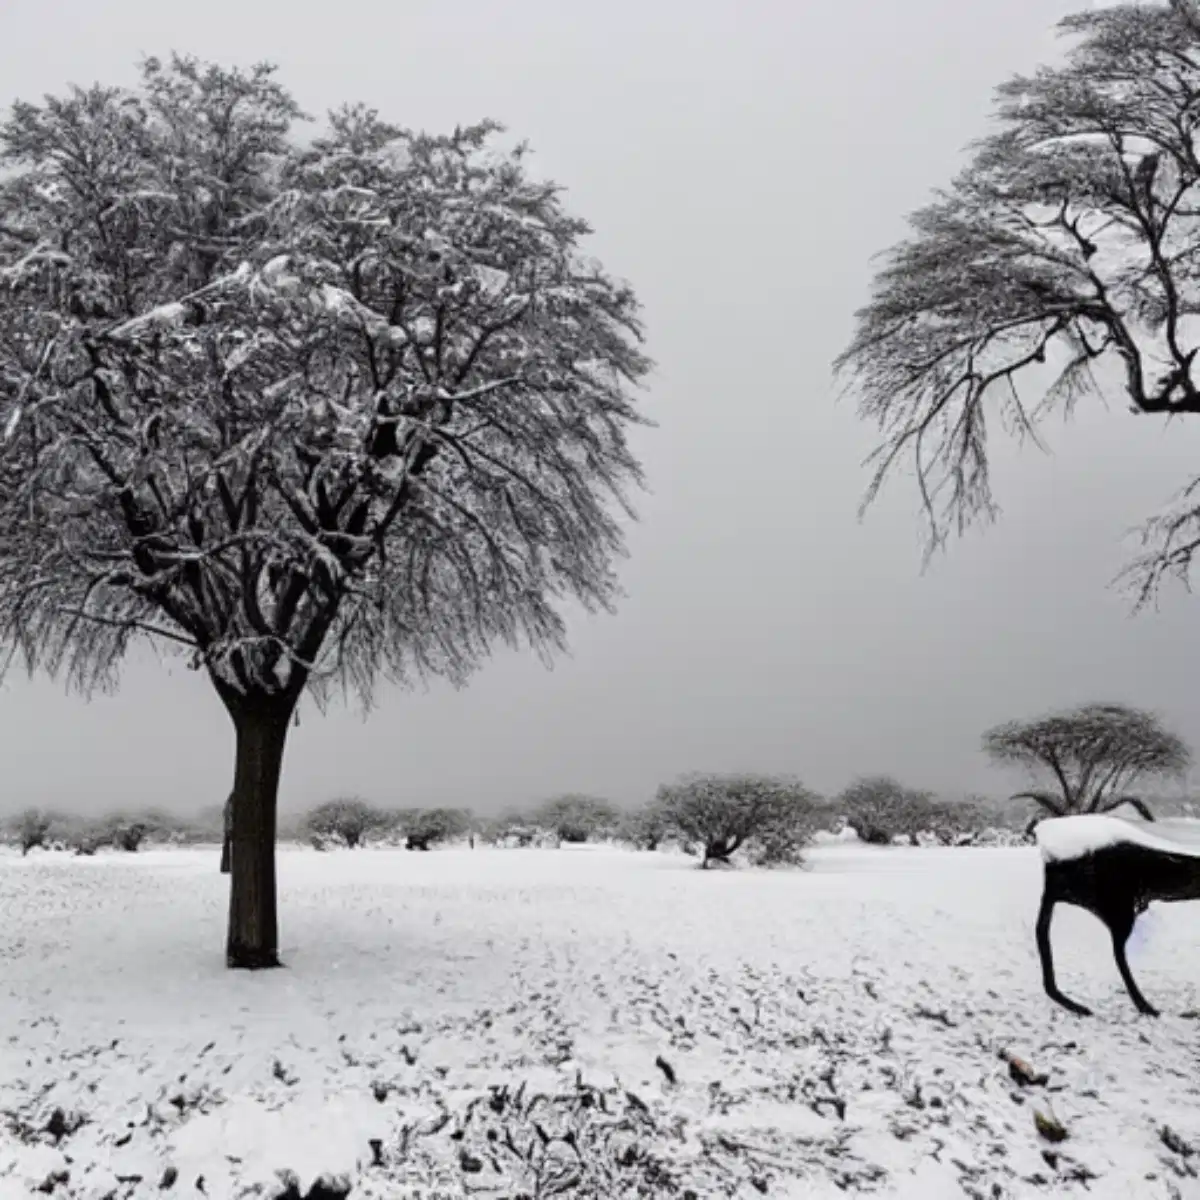 snow in africa all over the lanscape including 2 trees and the animals seems to enjoy it too